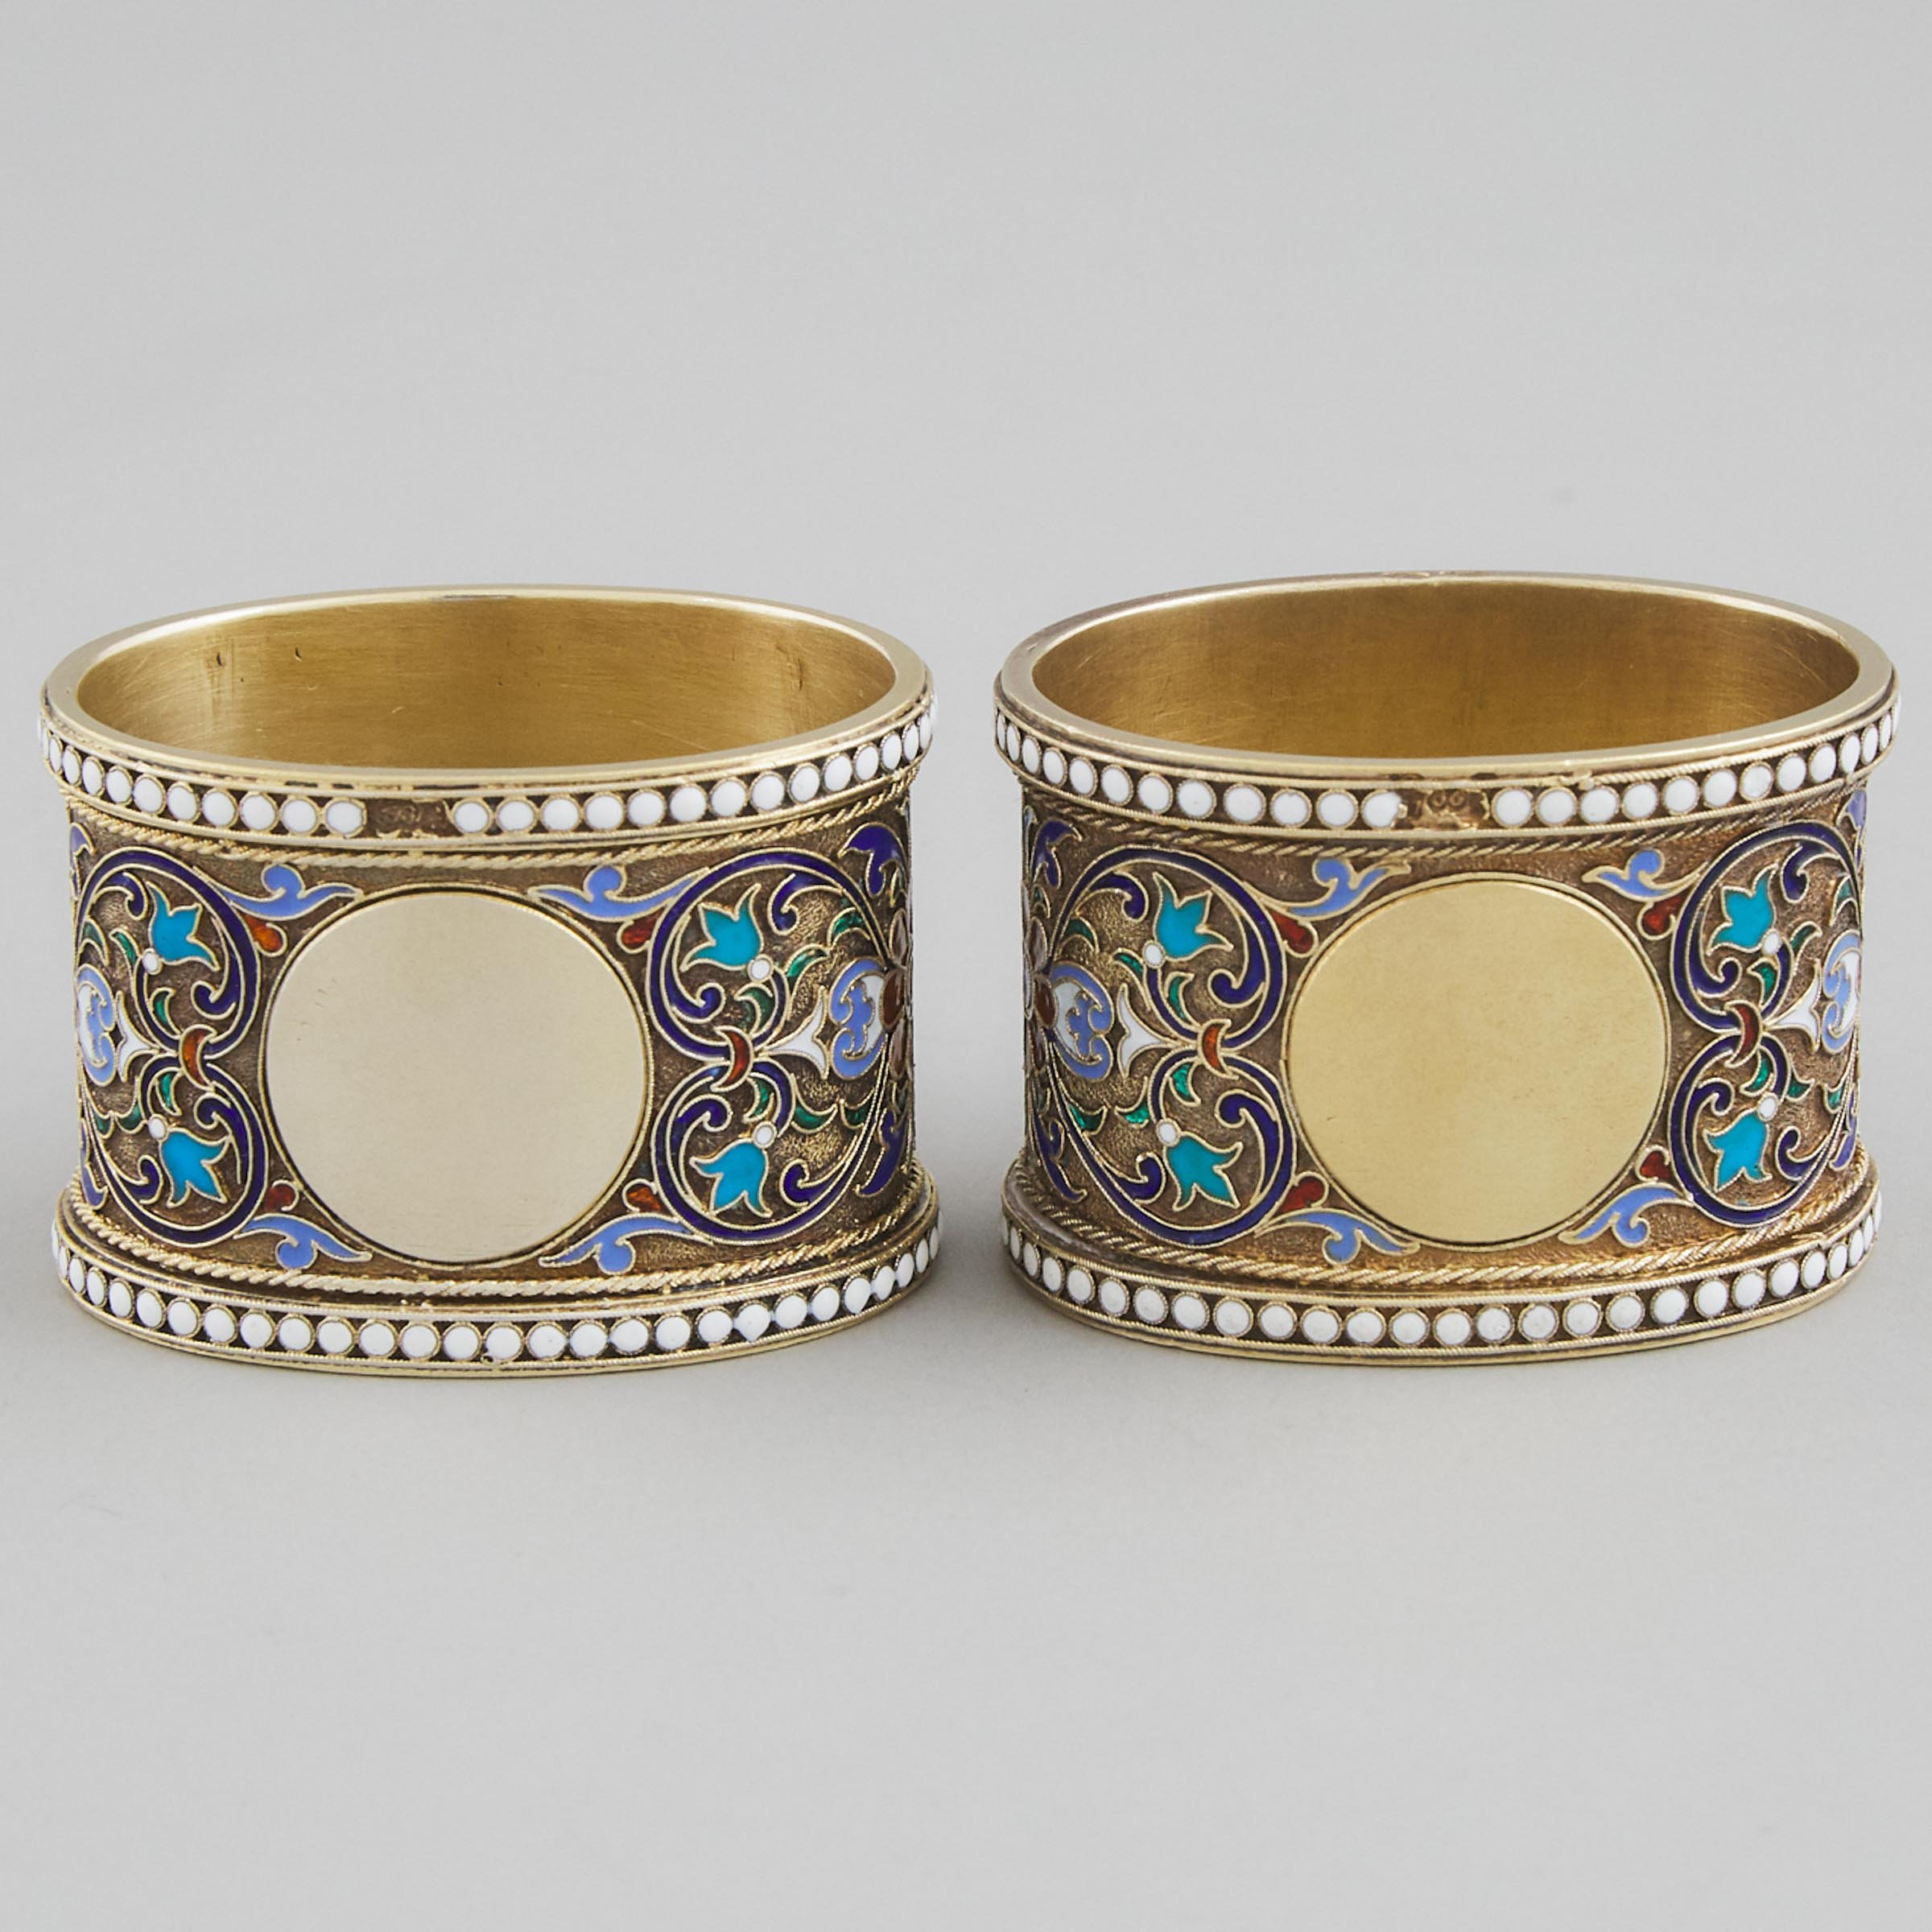 Pair of Russian Silver-Gilt and Cloisonné Enamel Oval Napkin Rings, Moscow, 1887(?)